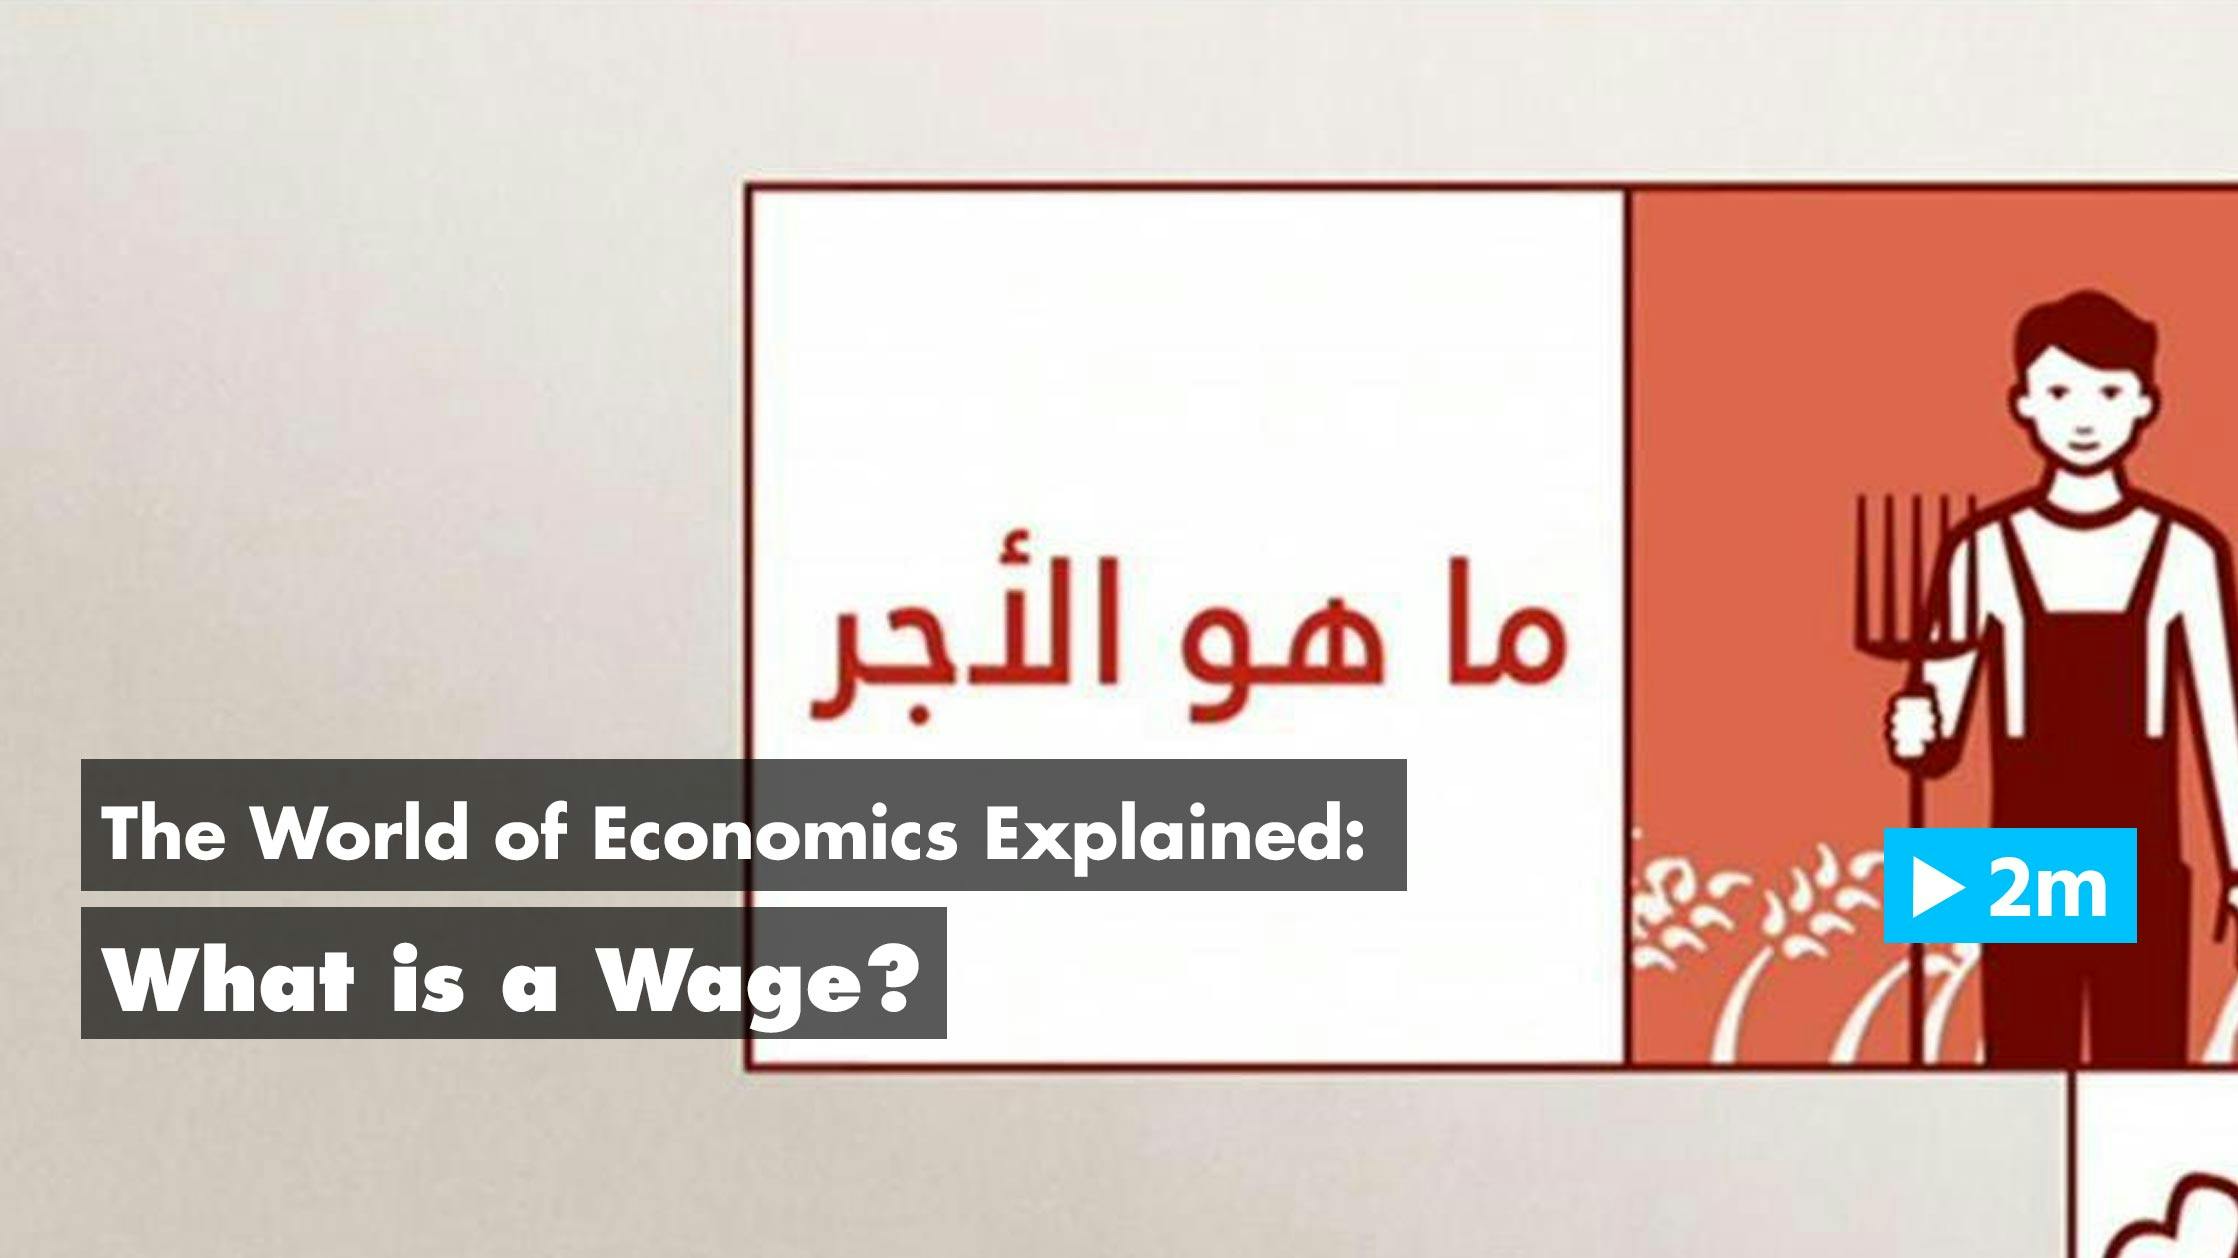 The World of Economics Explained: What is a wage?